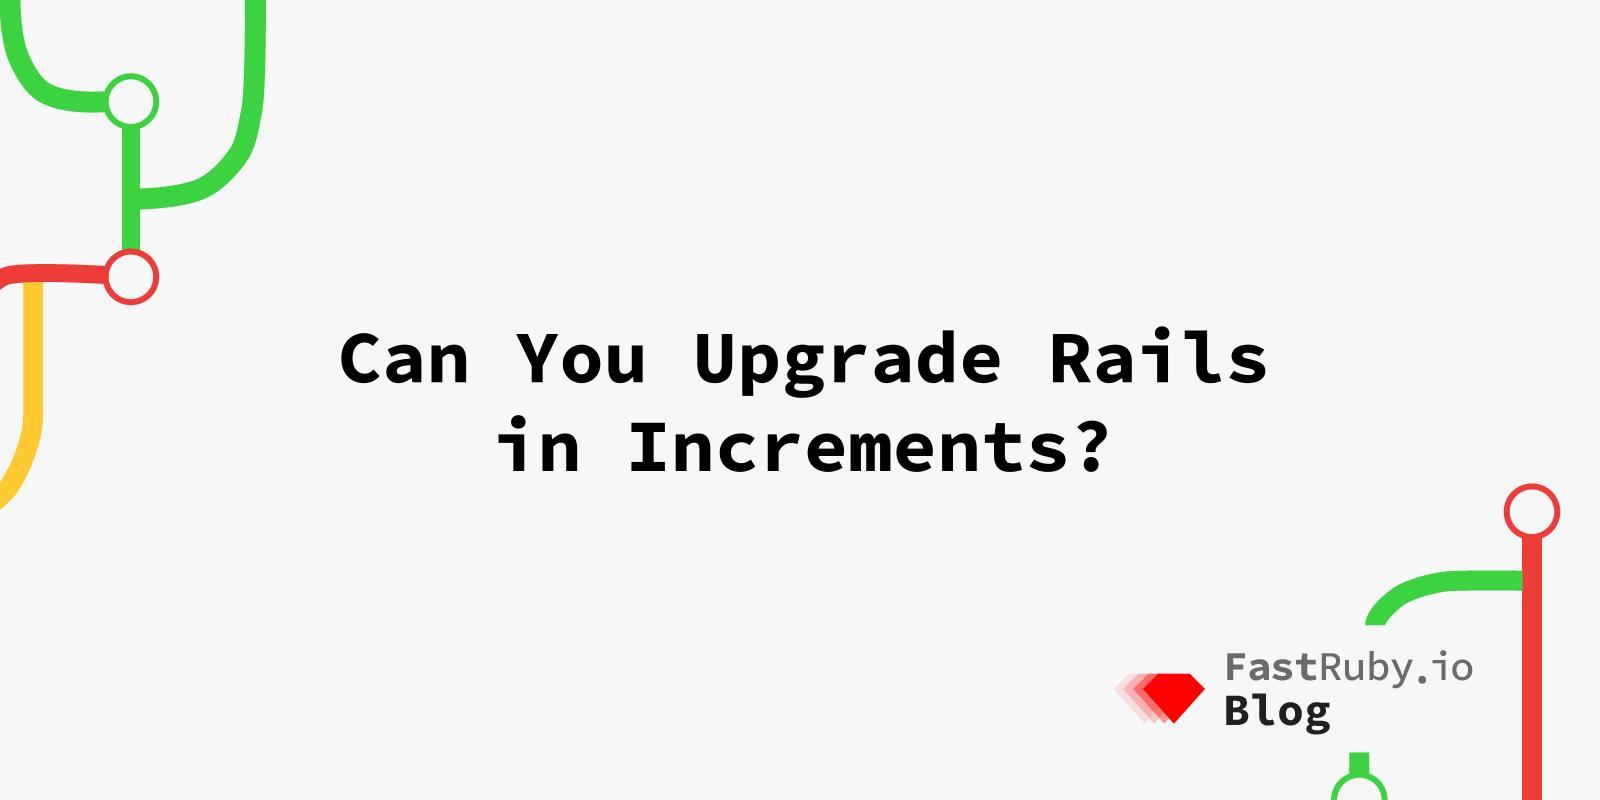 Can You Upgrade Rails in Increments?